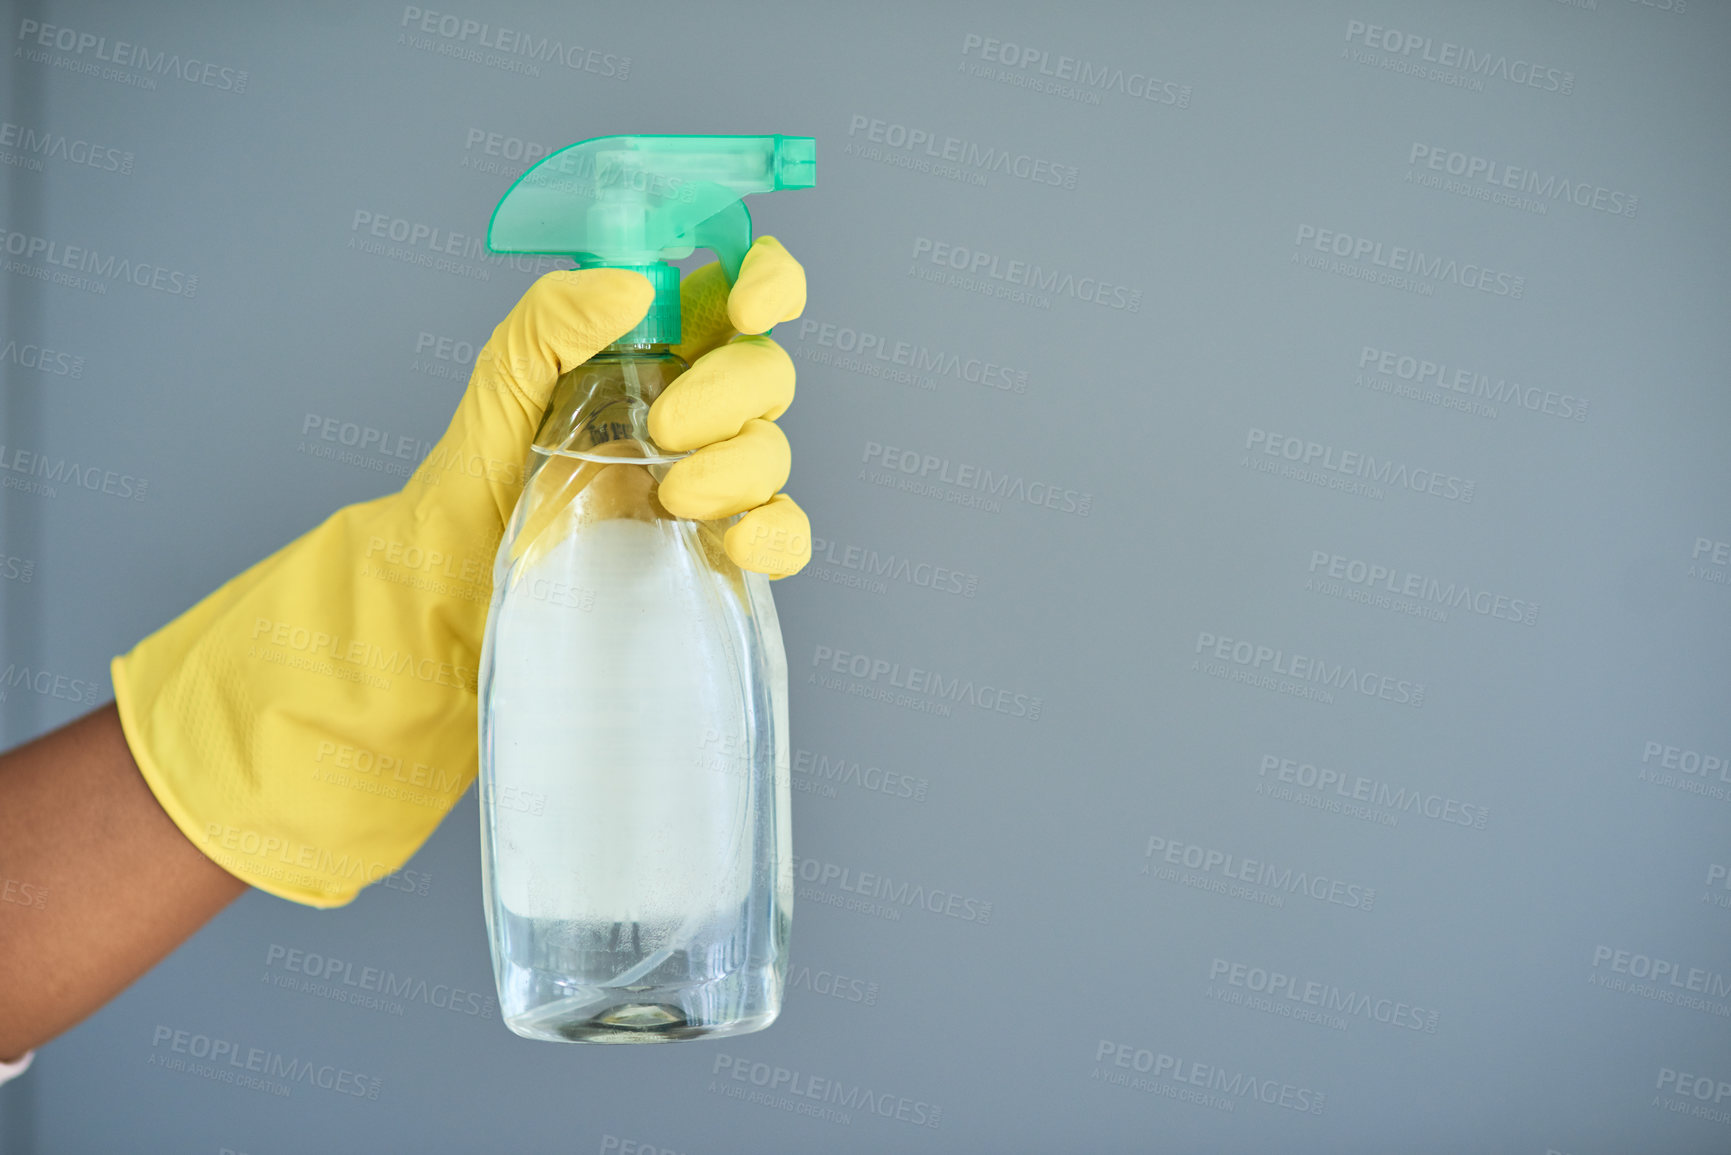 Buy stock photo Studio shot of an unrecognizable woman wearing rubber gloves and holding detergent against a gray background